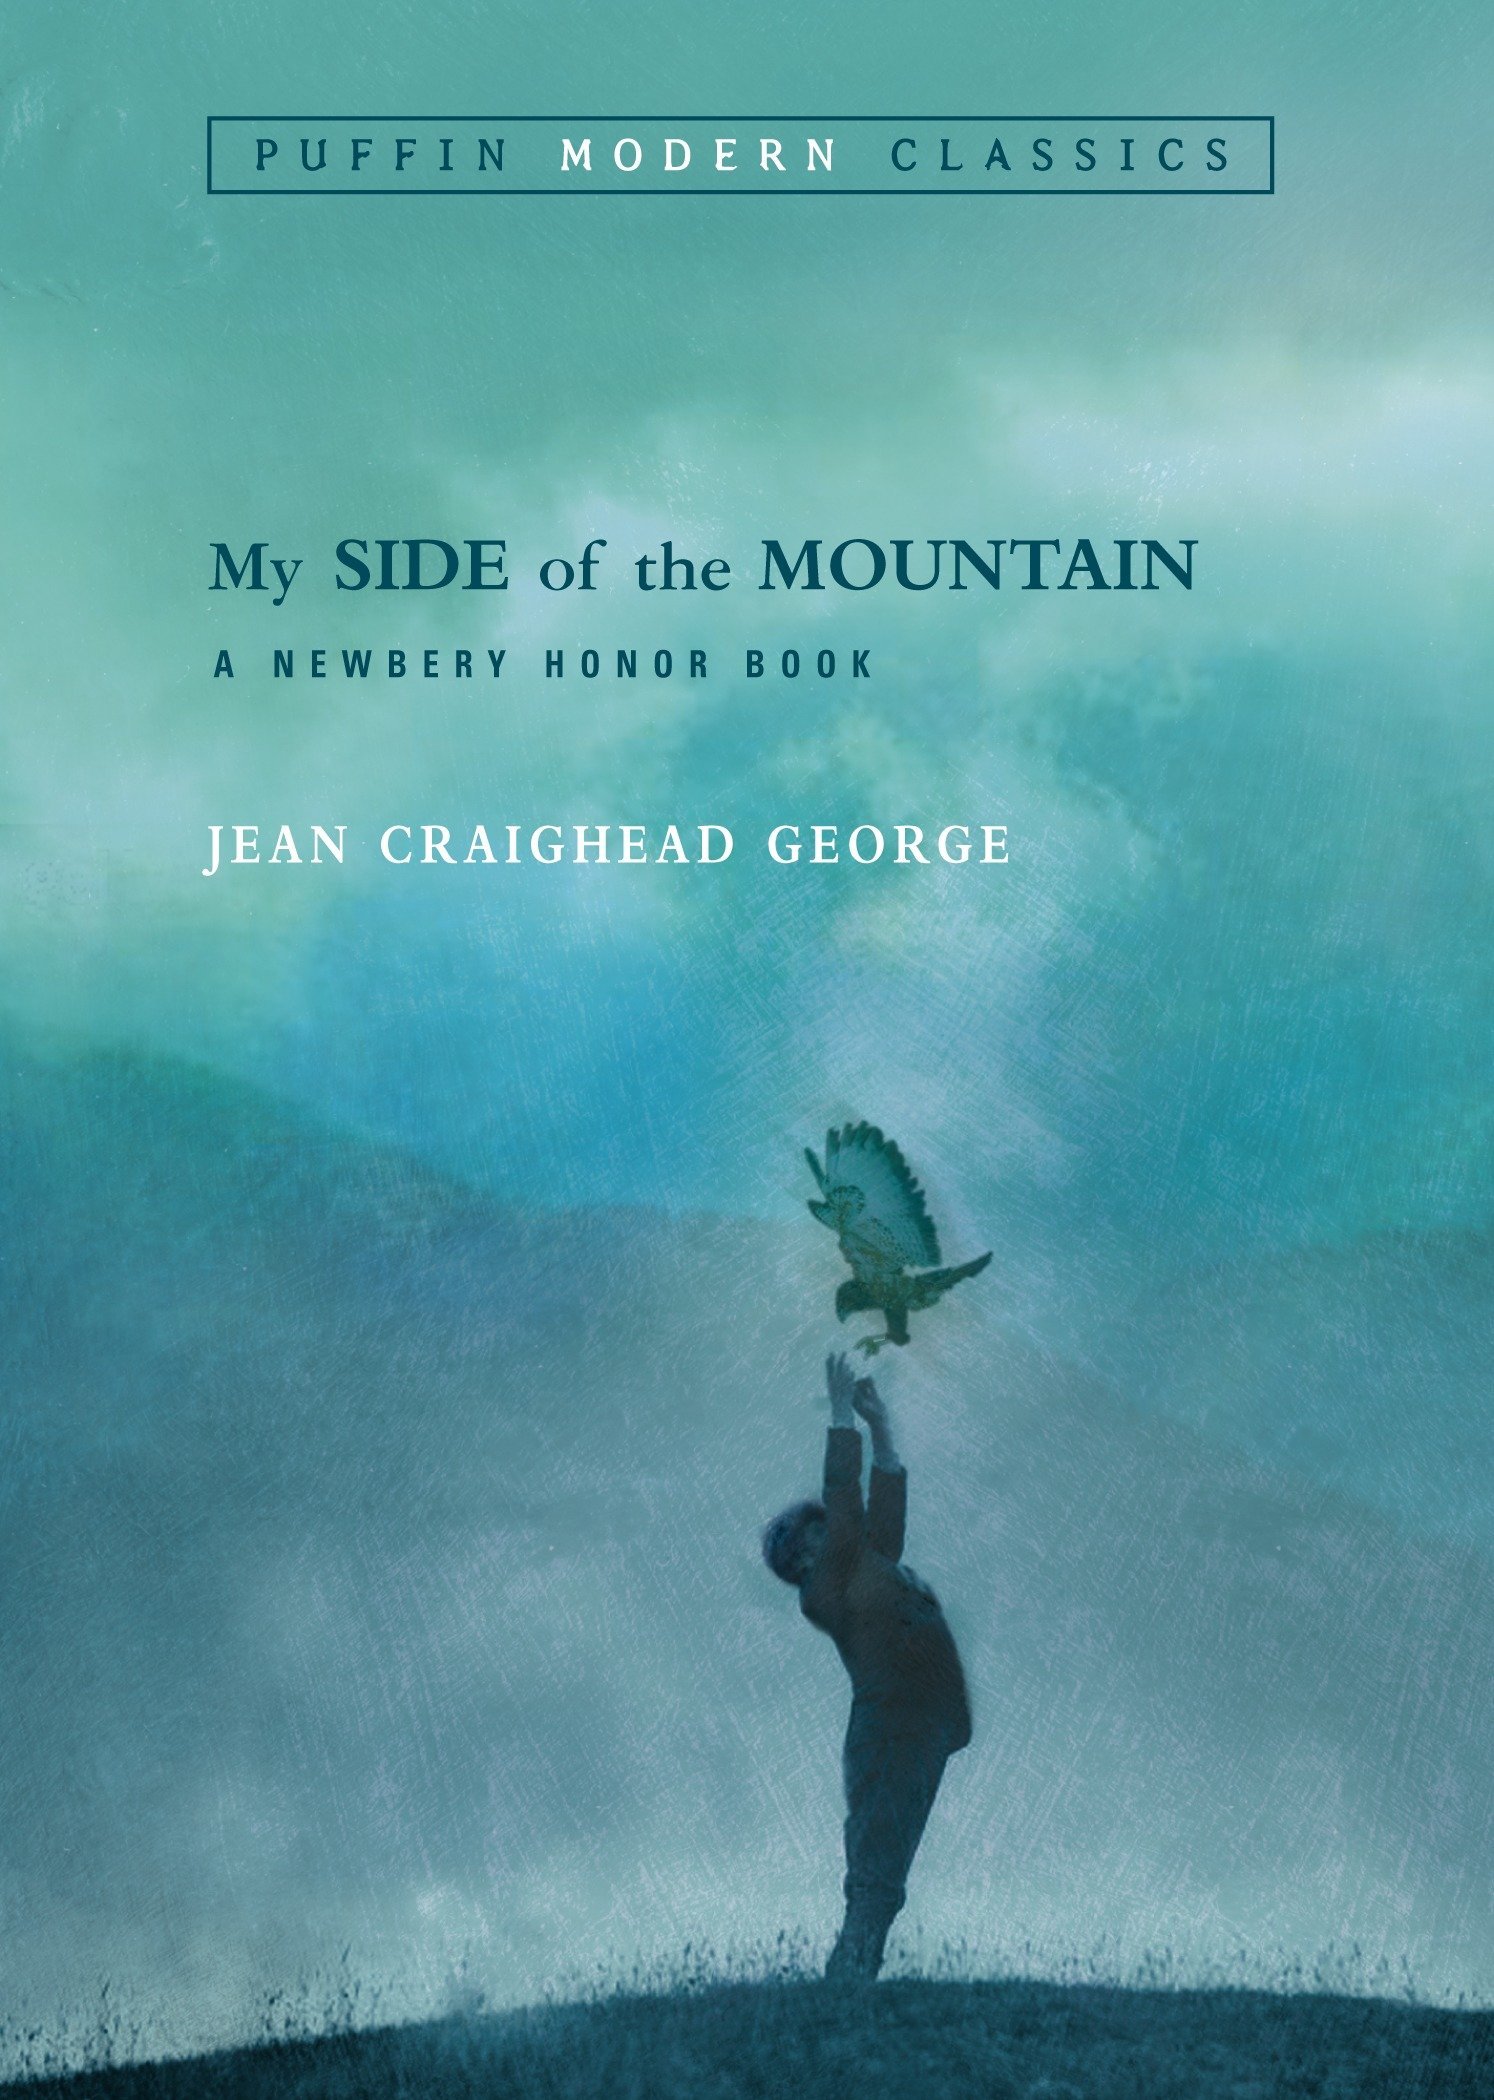 Book cover of My Side of the Mountain by Jean Craighead George